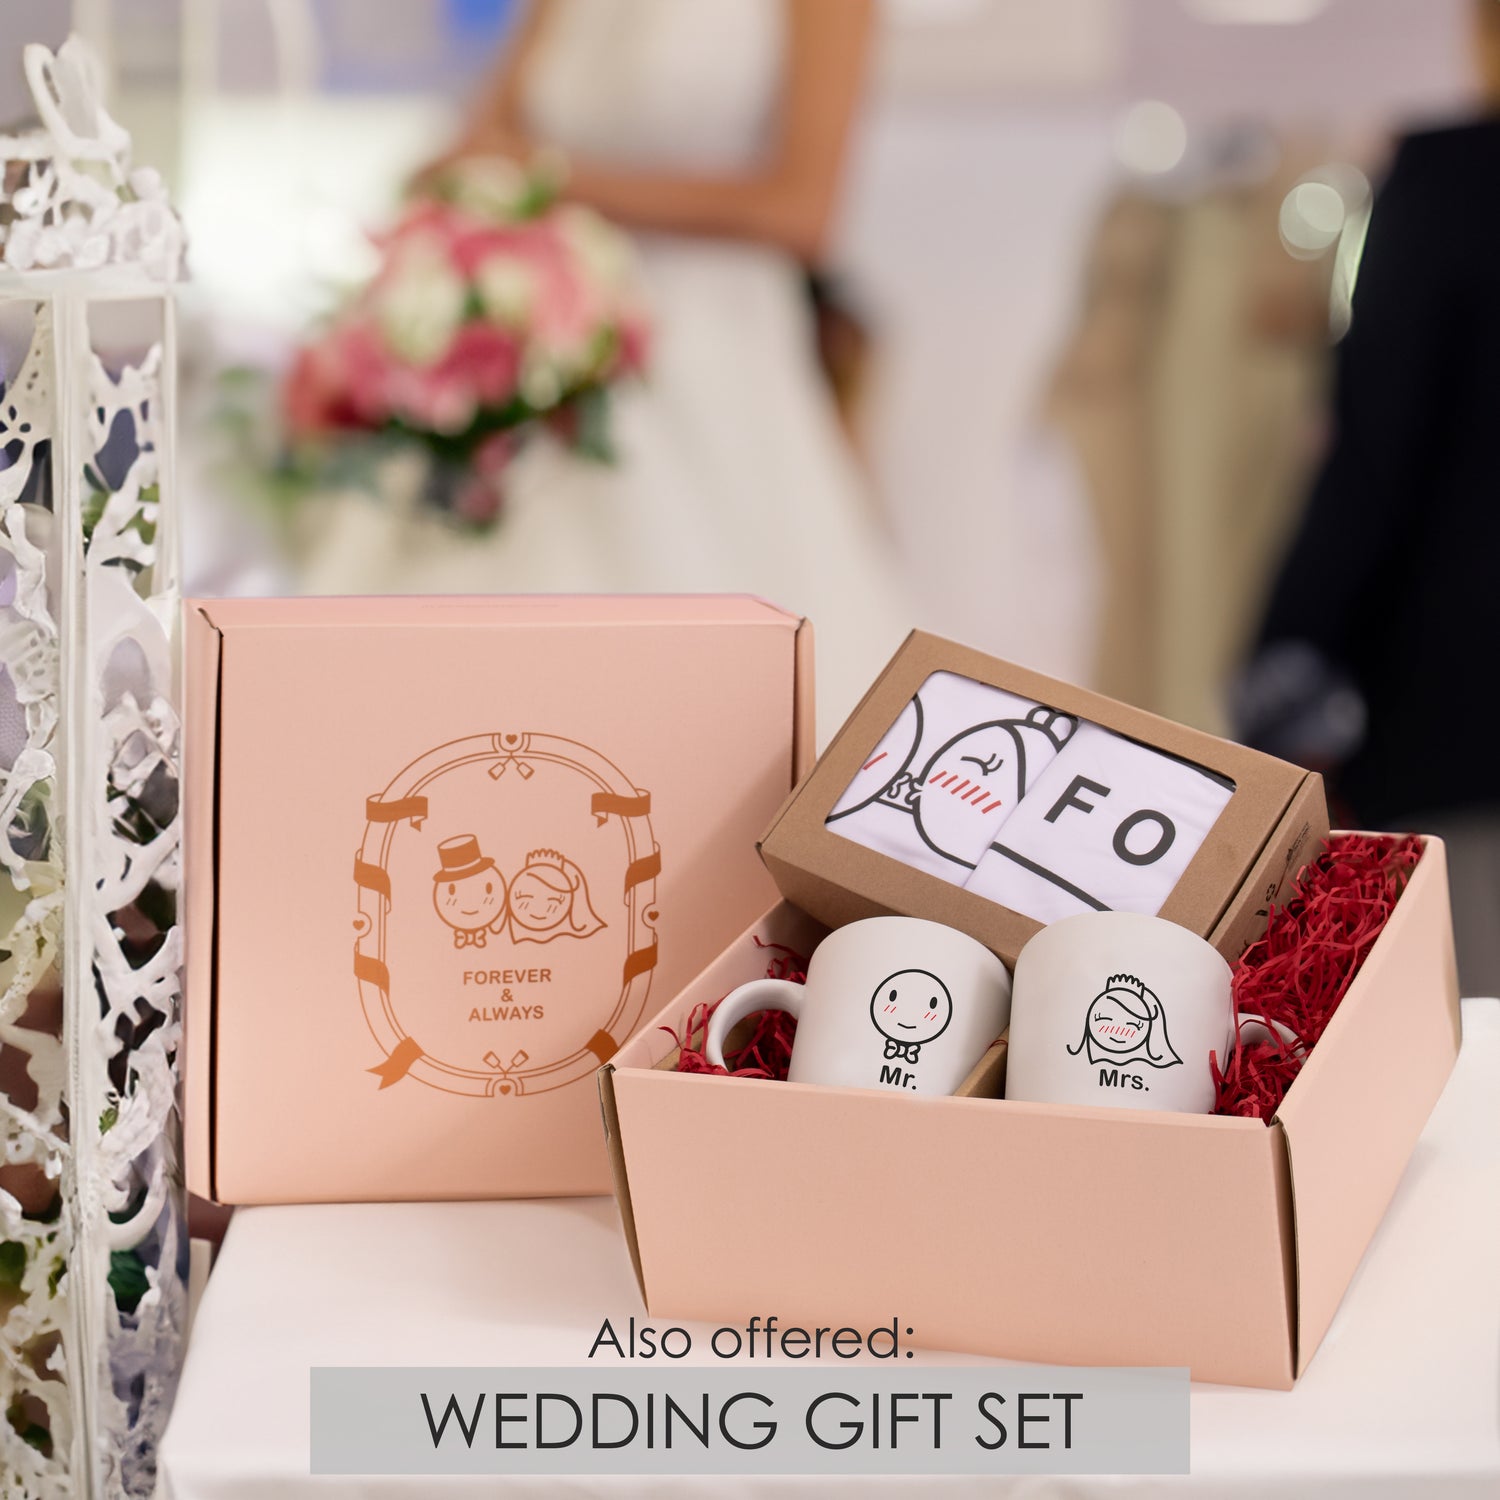 BoldLoft I Do I Do Wedding Gift Set! It is the perfect way to celebrate love and togetherness. This delightful set includes matching couple pillowcases and coffee mugs—a sweet way to commemorate the special bond between newlyweds.